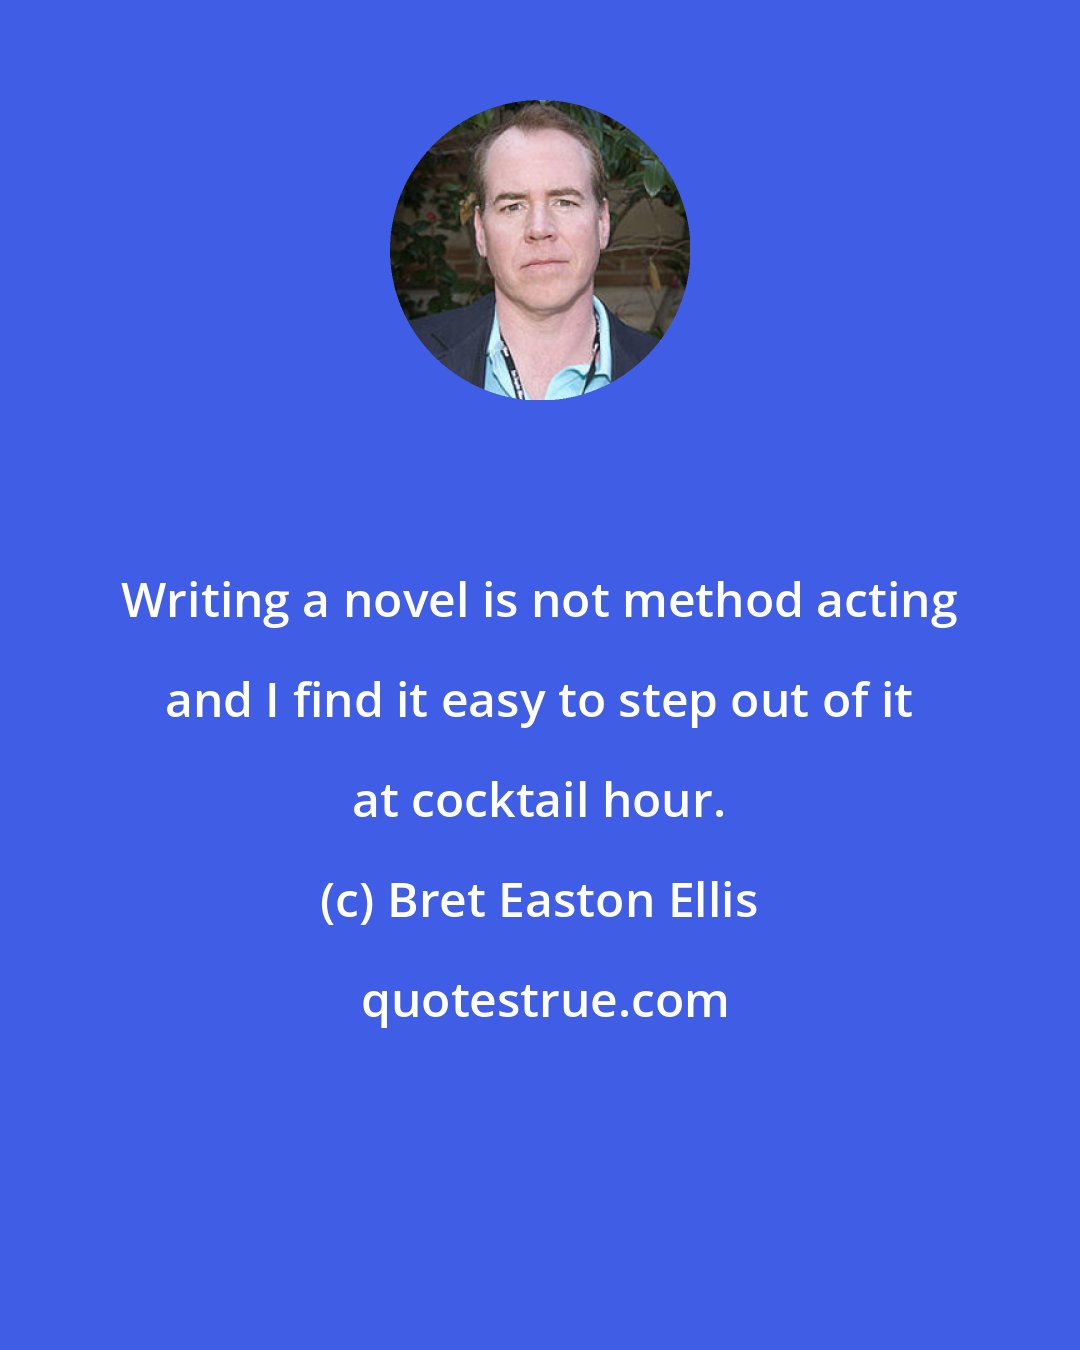 Bret Easton Ellis: Writing a novel is not method acting and I find it easy to step out of it at cocktail hour.